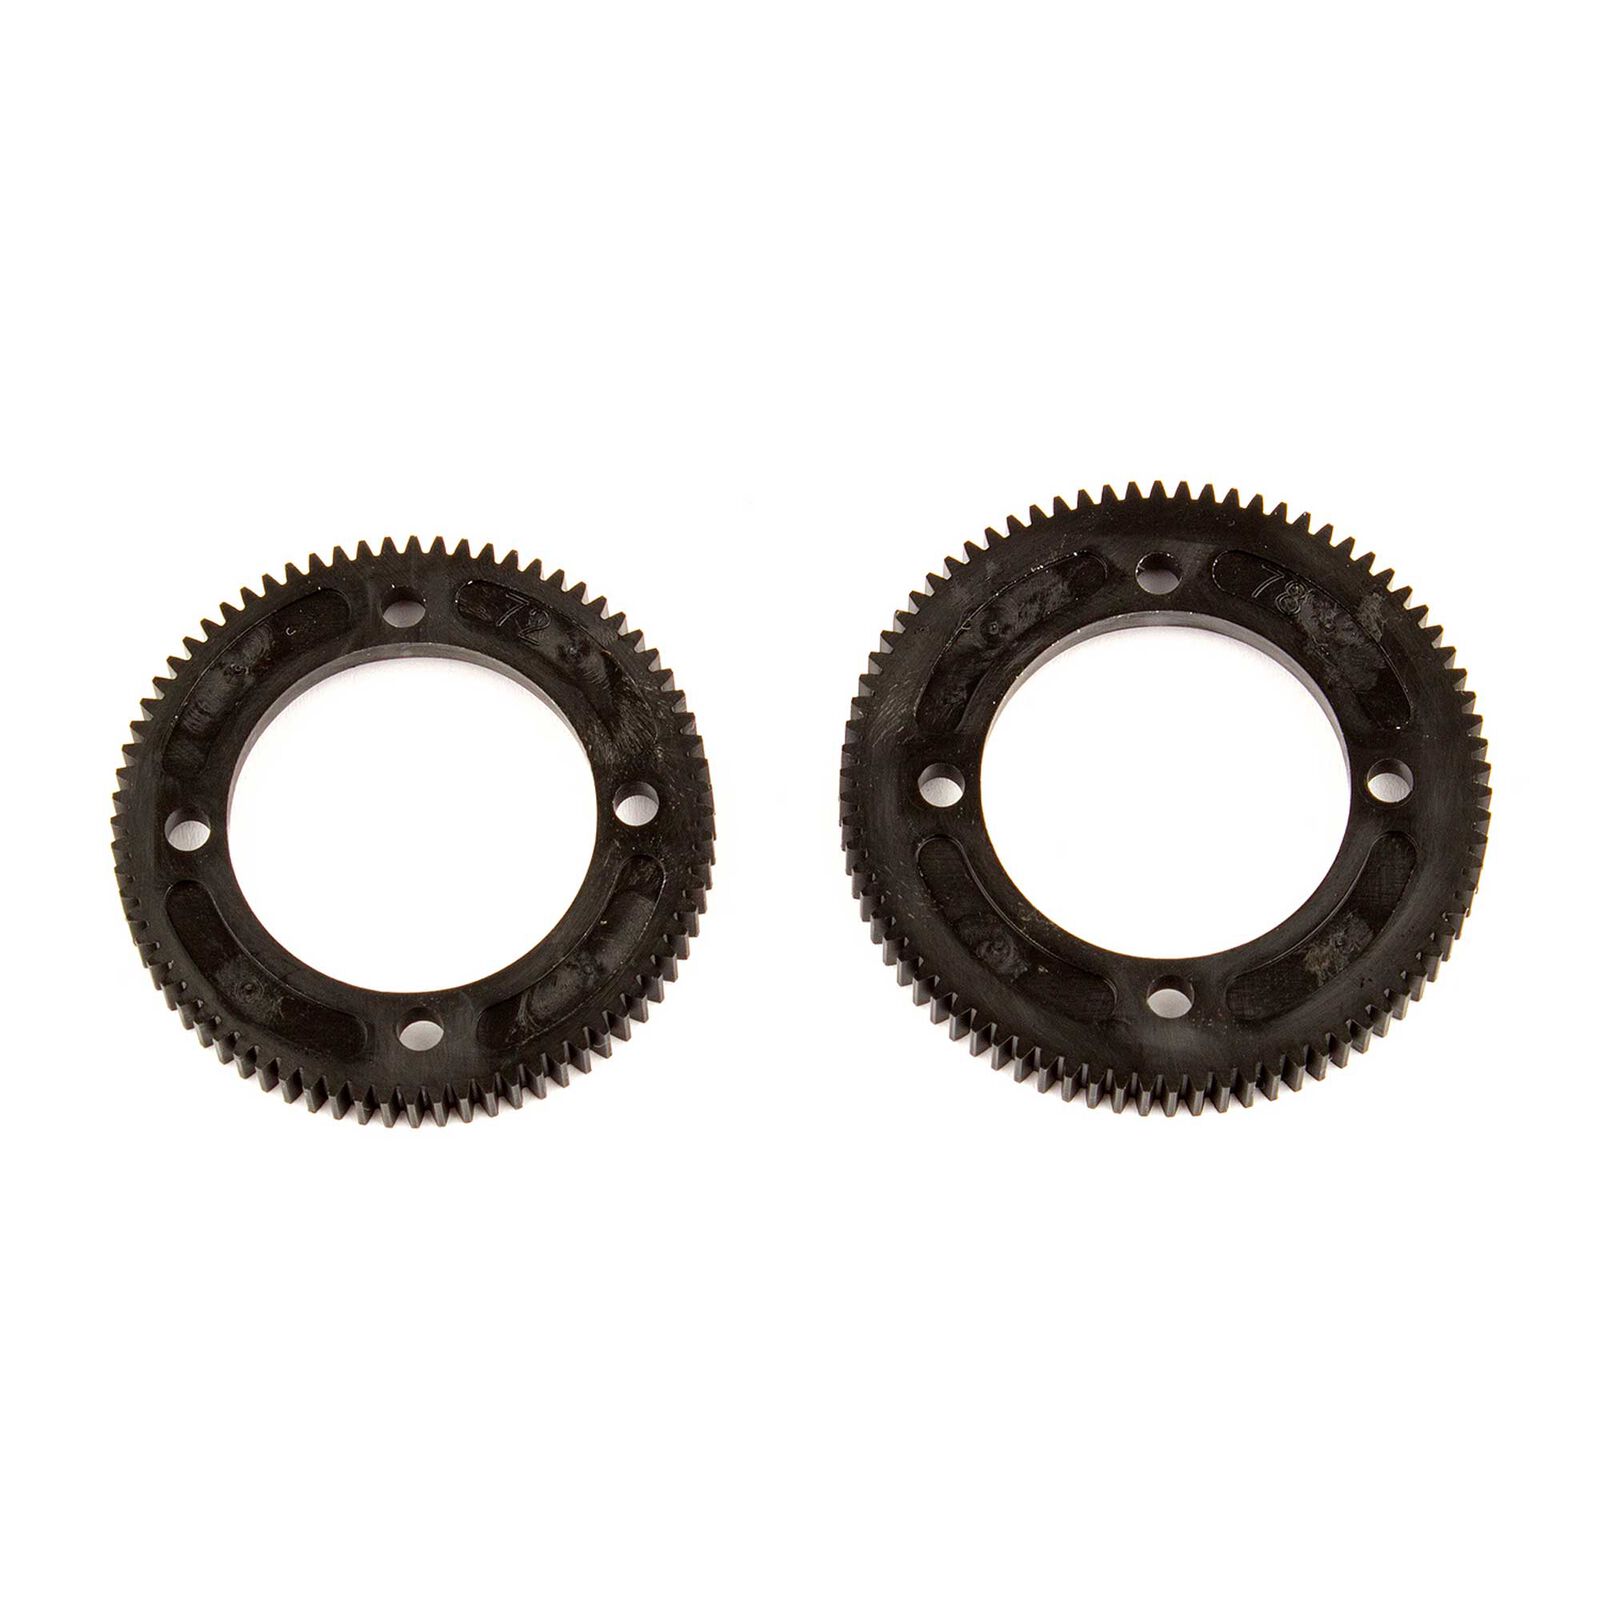 Center Diff Spur Gear 72/78 Tooth: RC10B74